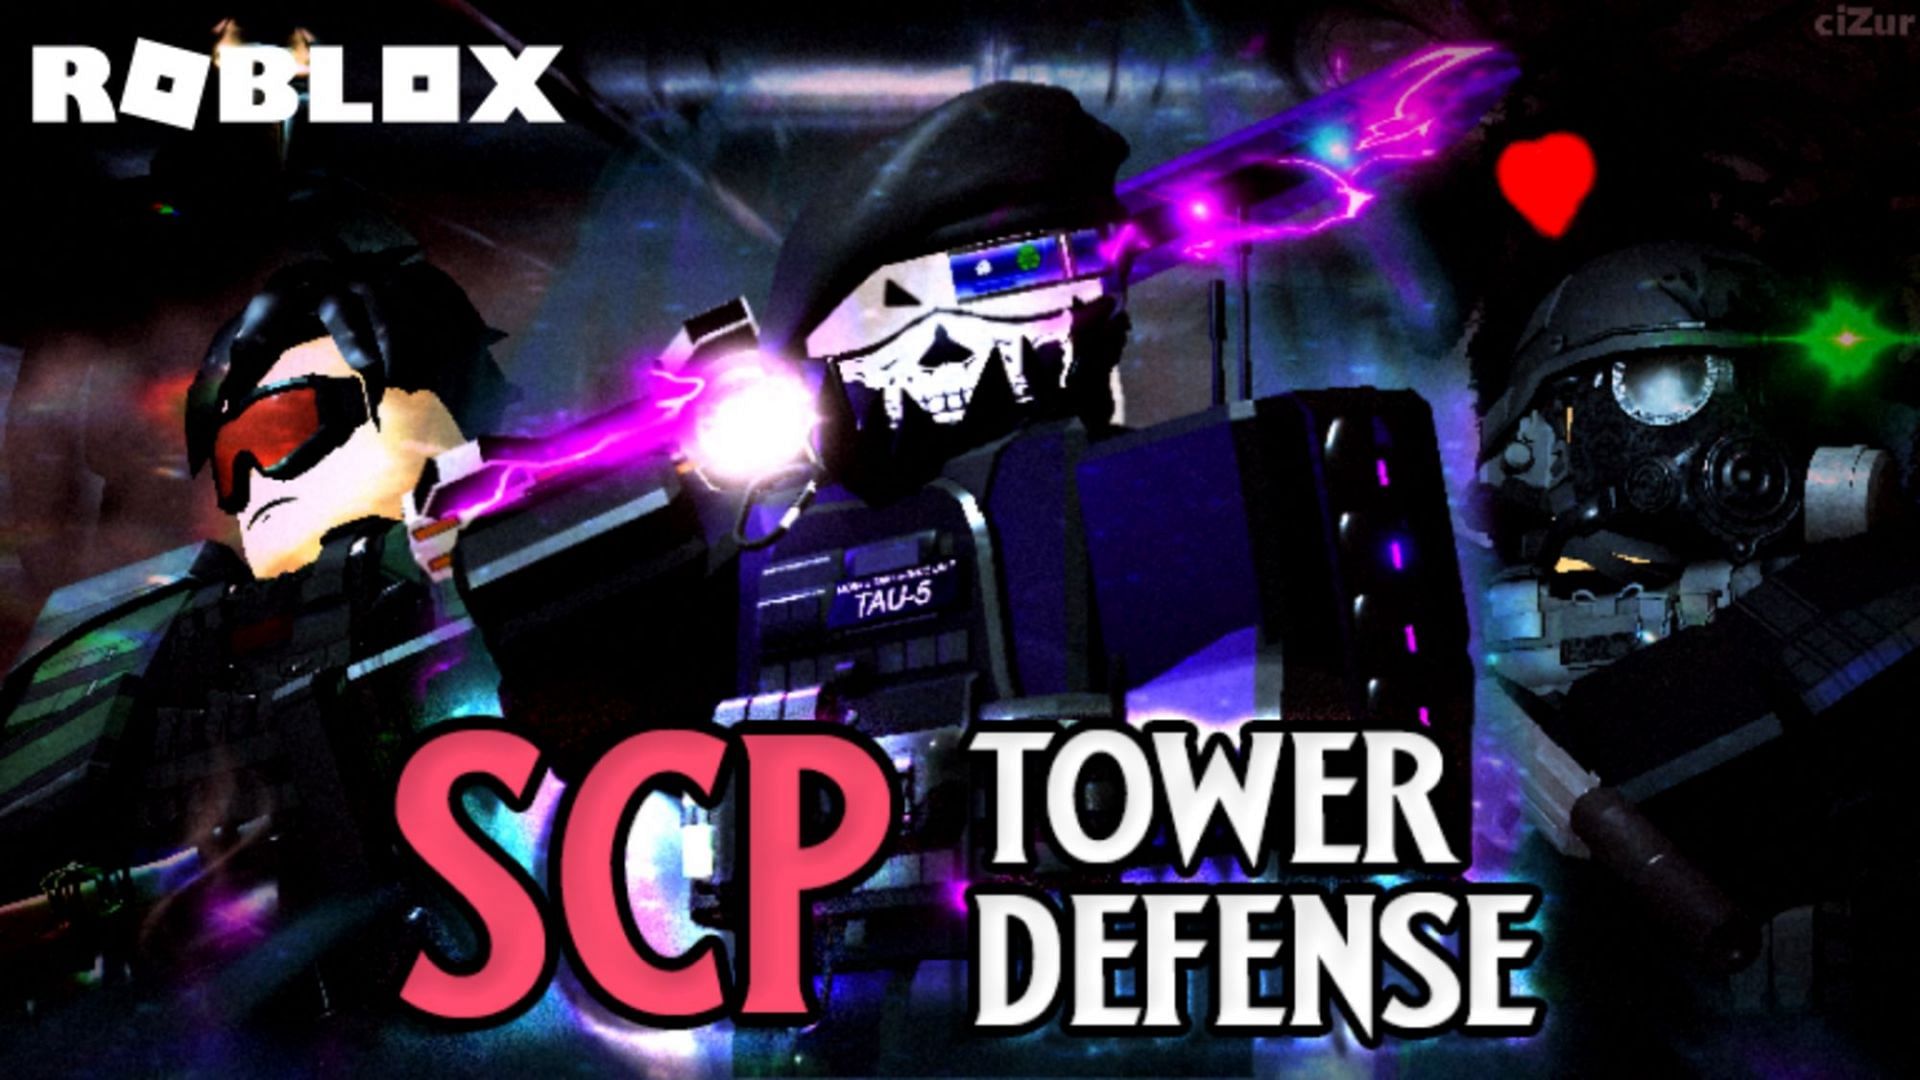 All Star Tower Defense - How To Enter Codes on Roblox Mobile & PC (+ Rare  Codes) 